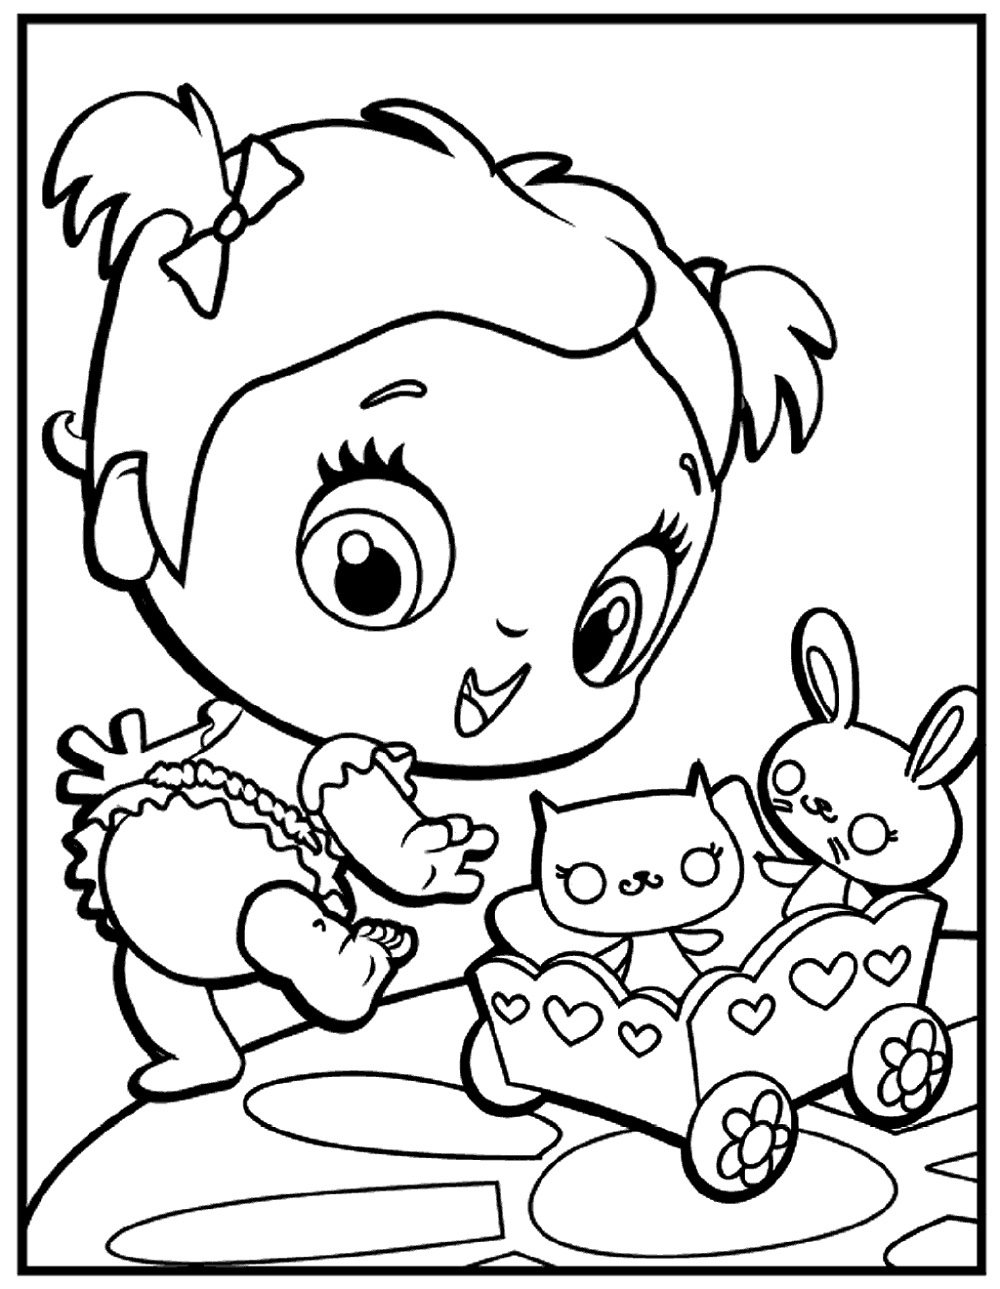 packets-template-in-2022-cute-coloring-pages-baby-alive-food-kawaii